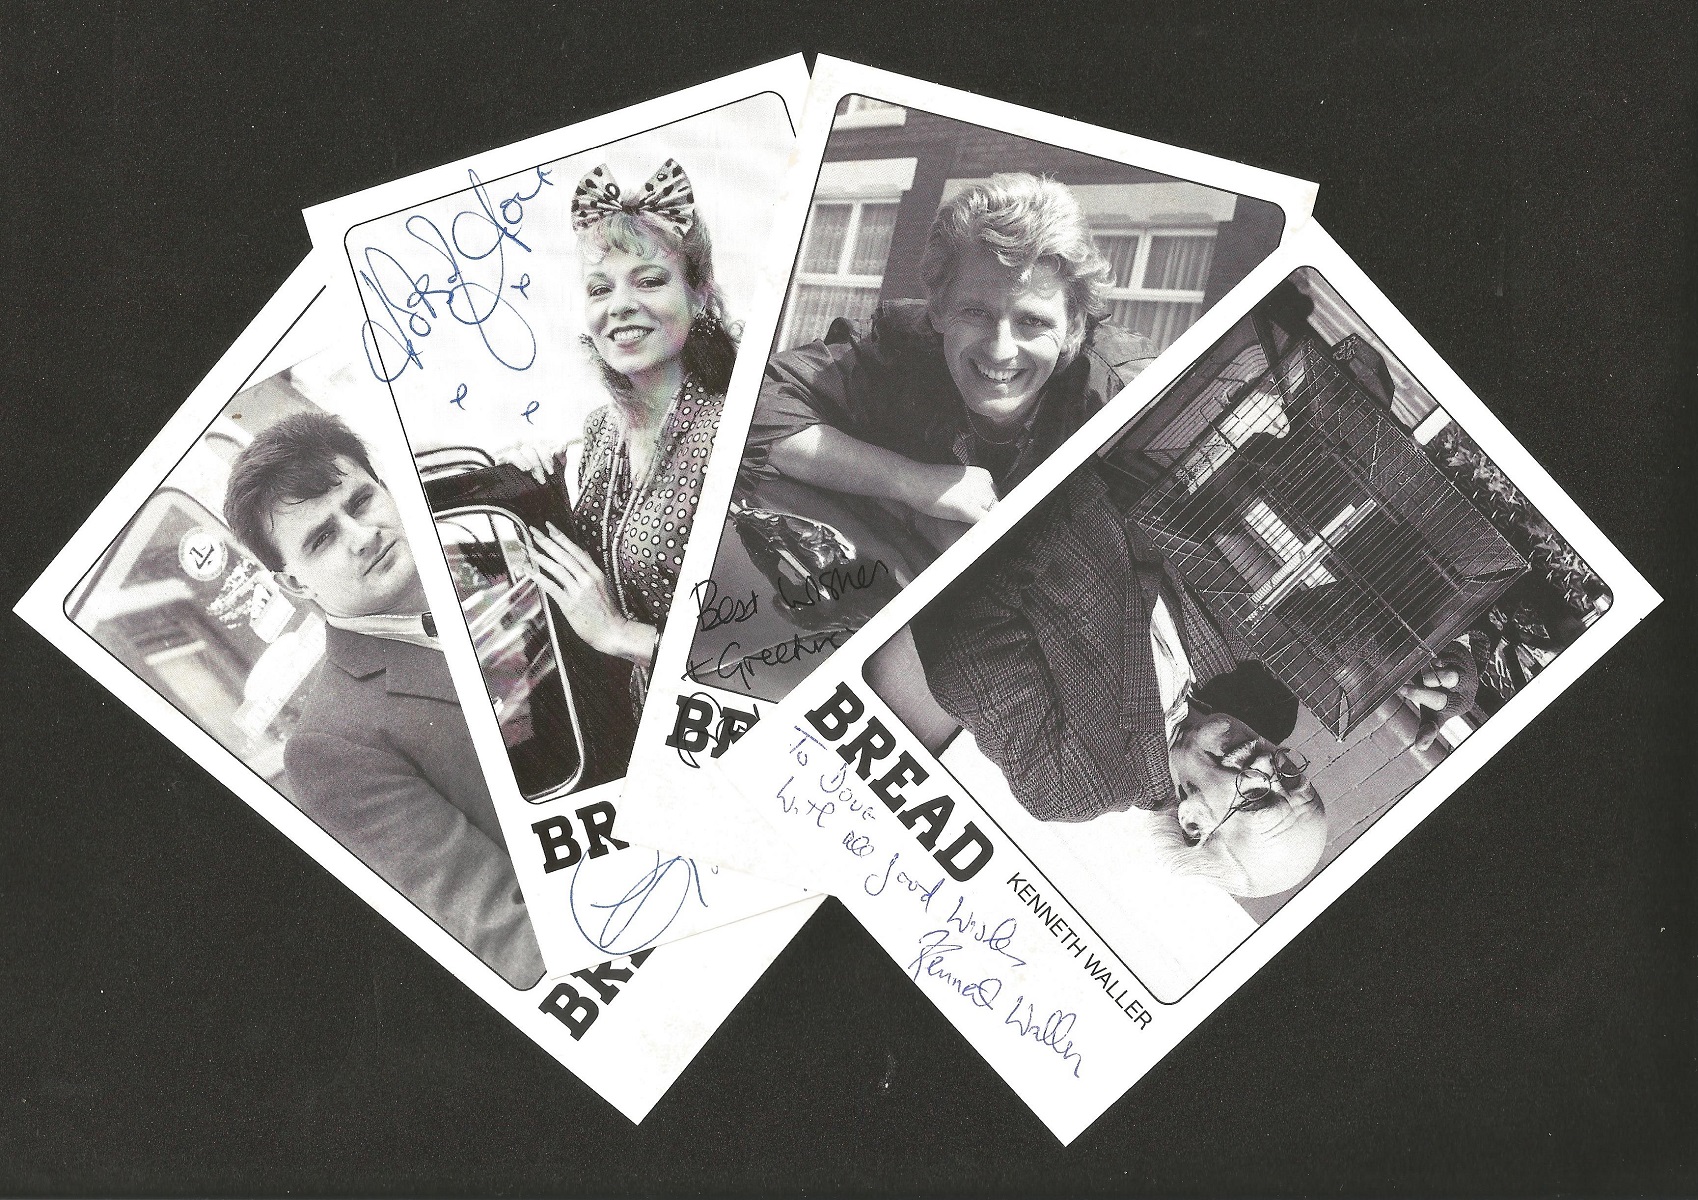 Bread collection of 10 signed 6x4 black and white photographs. These black and white signed promo